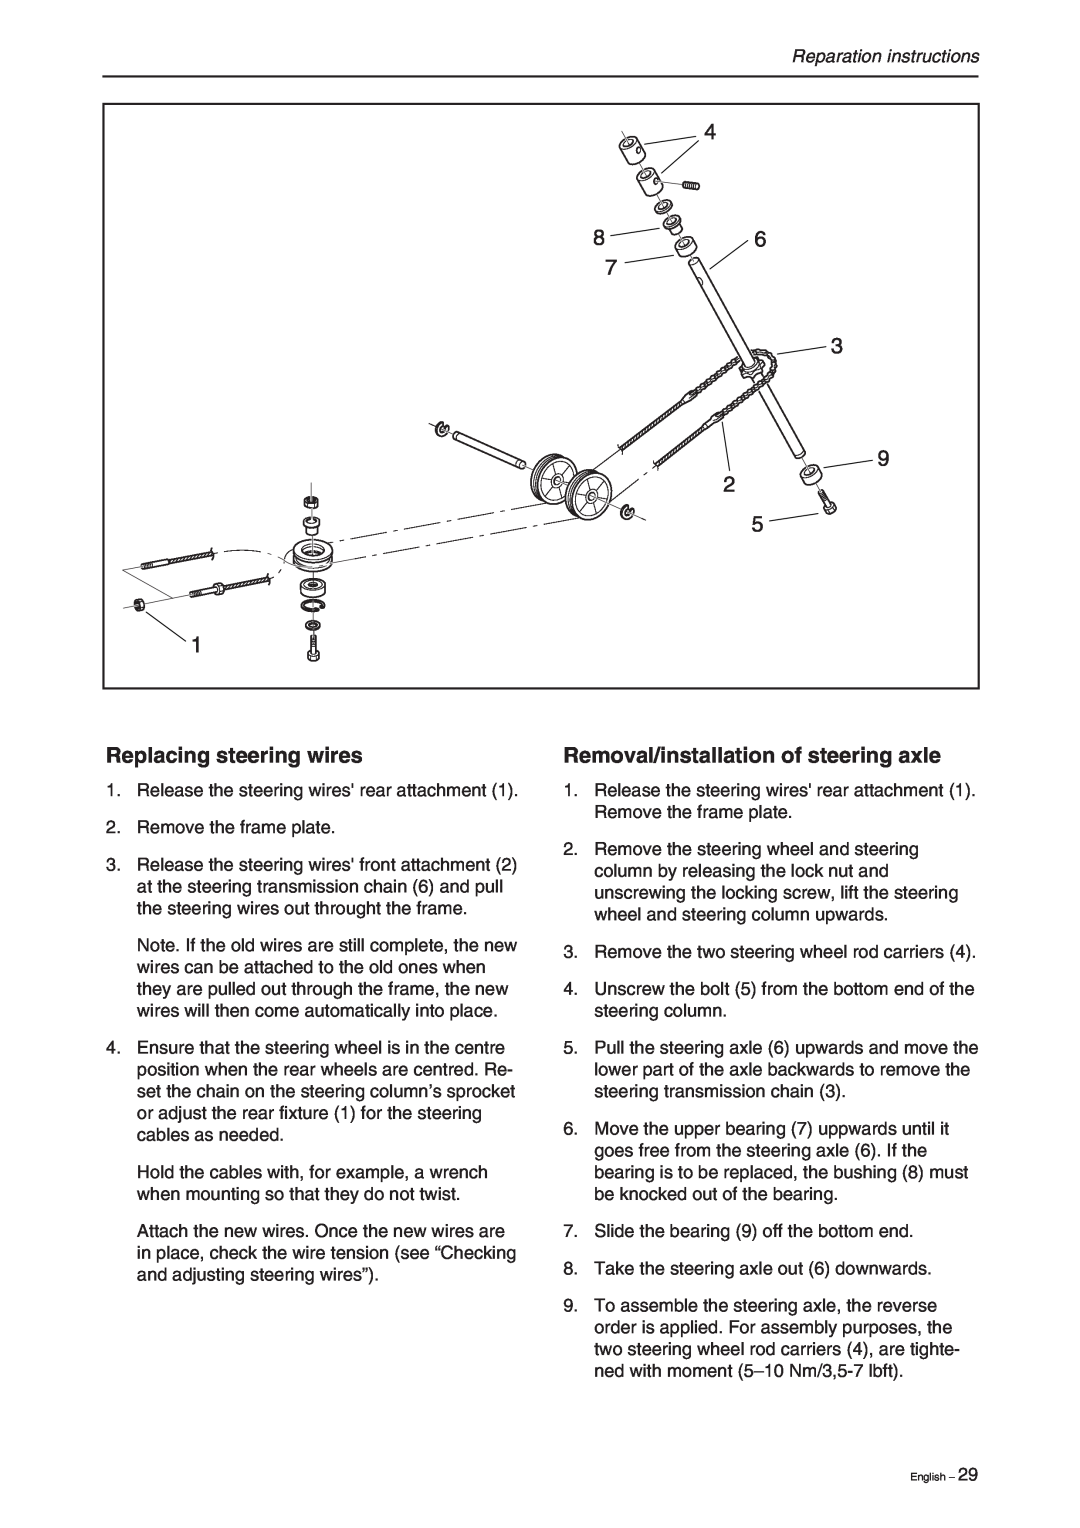 Briggs & Stratton RIDER 11 BIO Replacing steering wires, Removal/installation of steering axle, Reparation instructions 